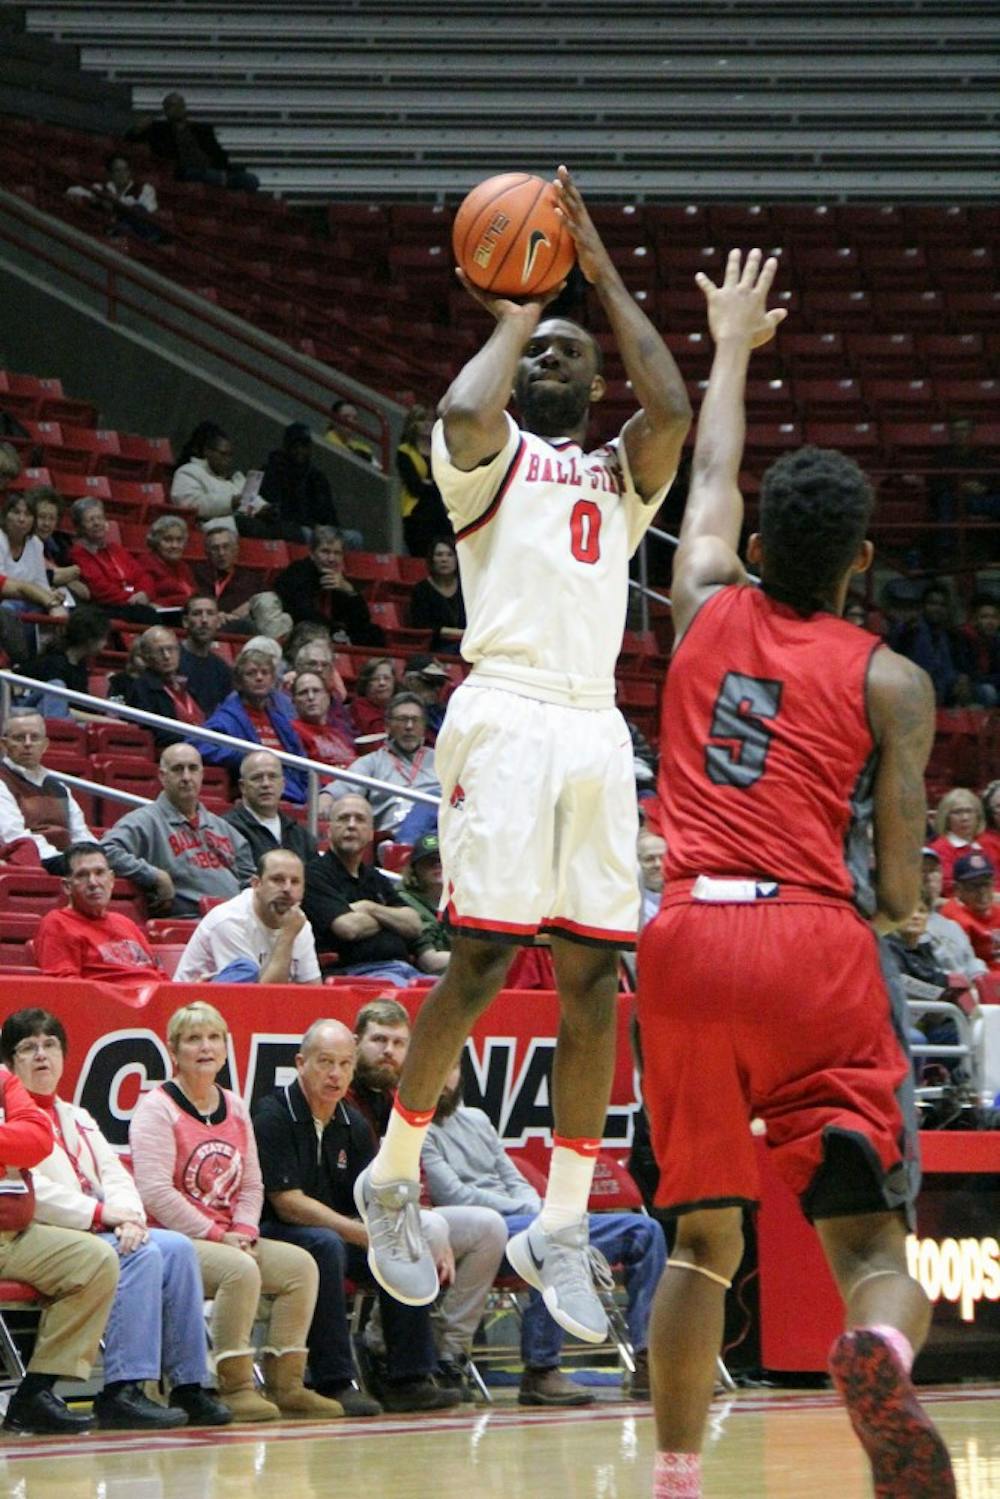 Guard Francis Kiapway goes up for a shot during the Cardinals’ game against IU Kokomo on Nov. 29 in Worthen Arena. Ball State won 92 to 52. Paige Grider// DN